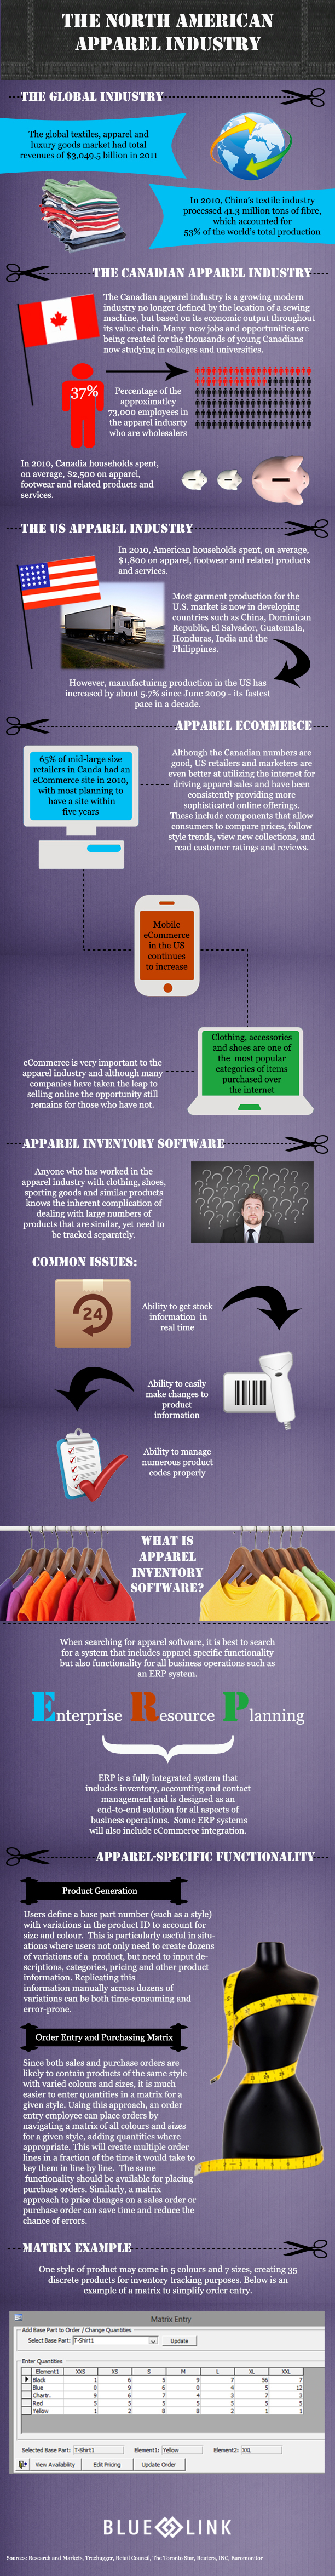 apparel-inventory-software-industry-infographic